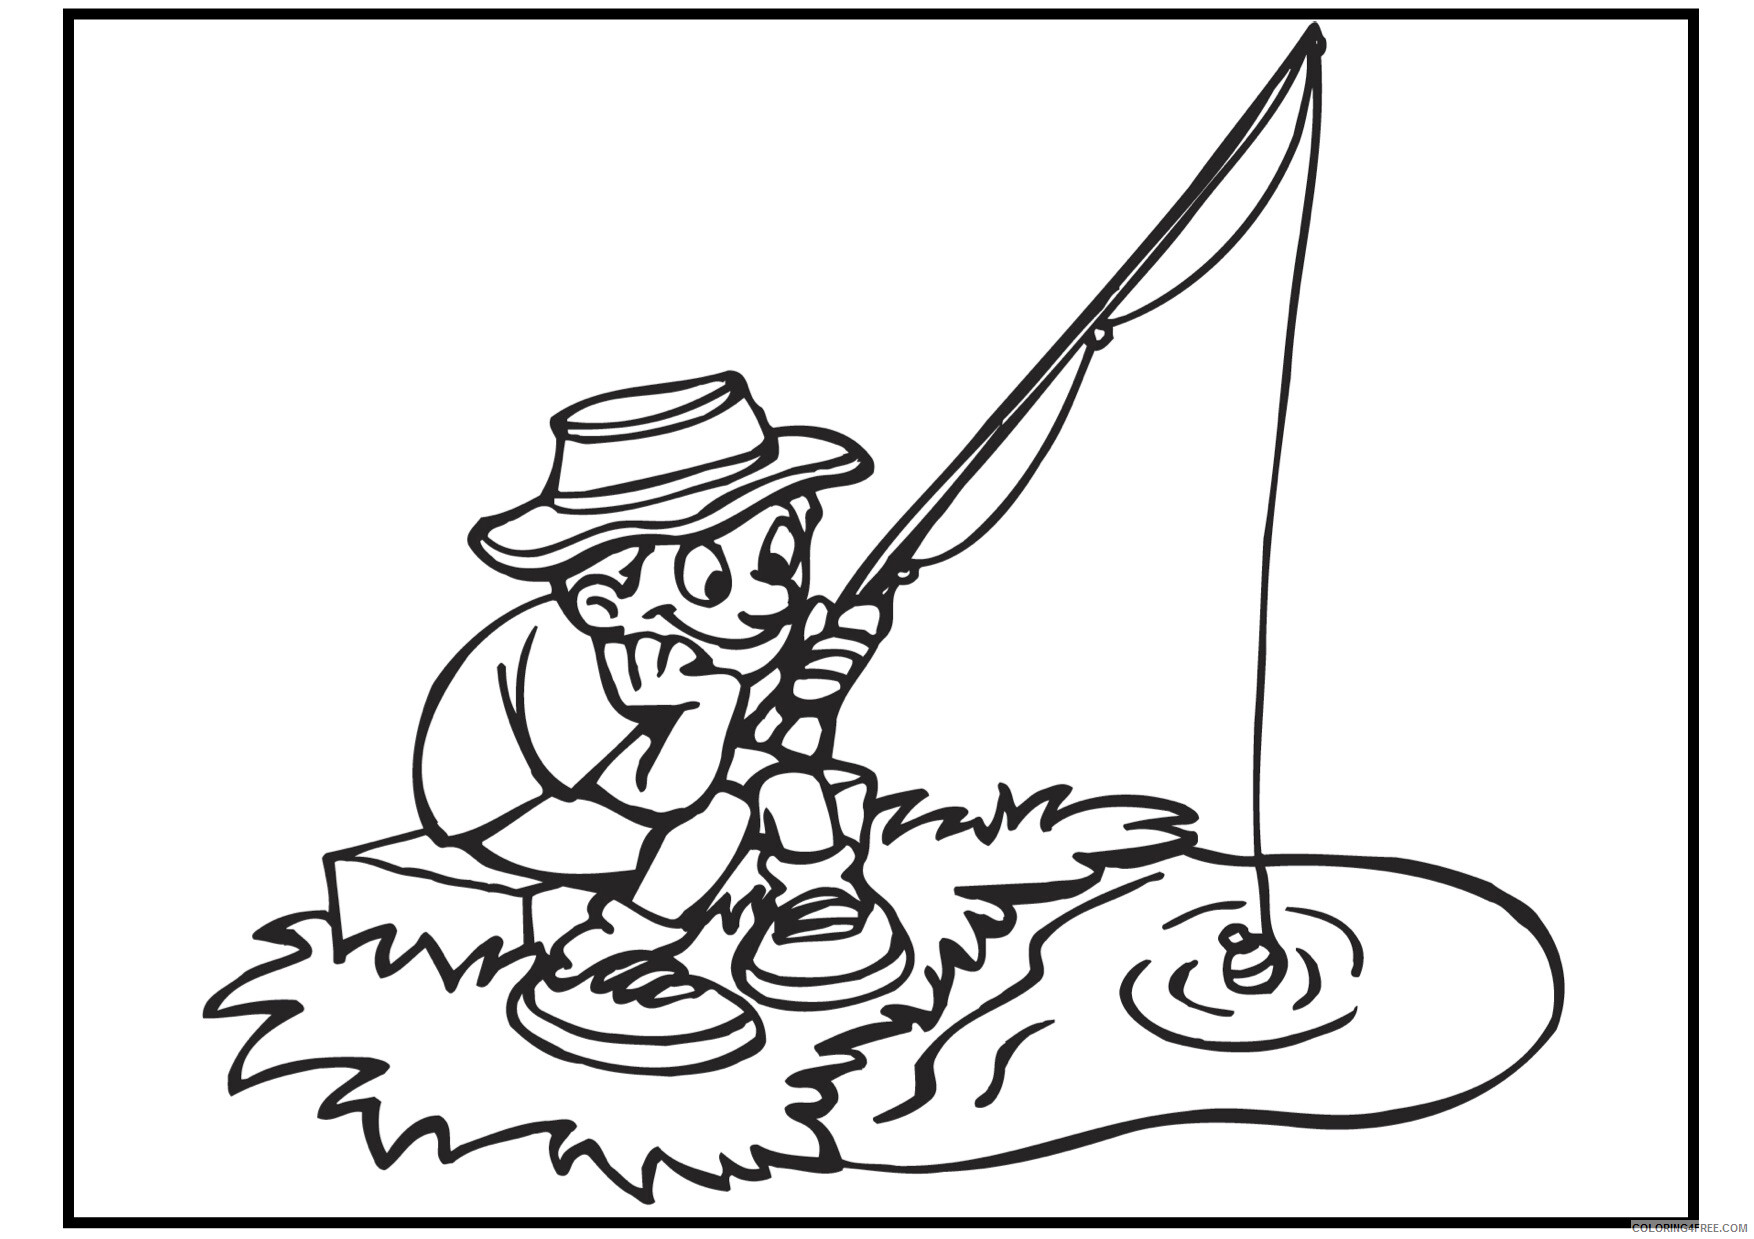 Fishing Coloring Pages for boys Free Fishing Printable 2020 0365 Coloring4free